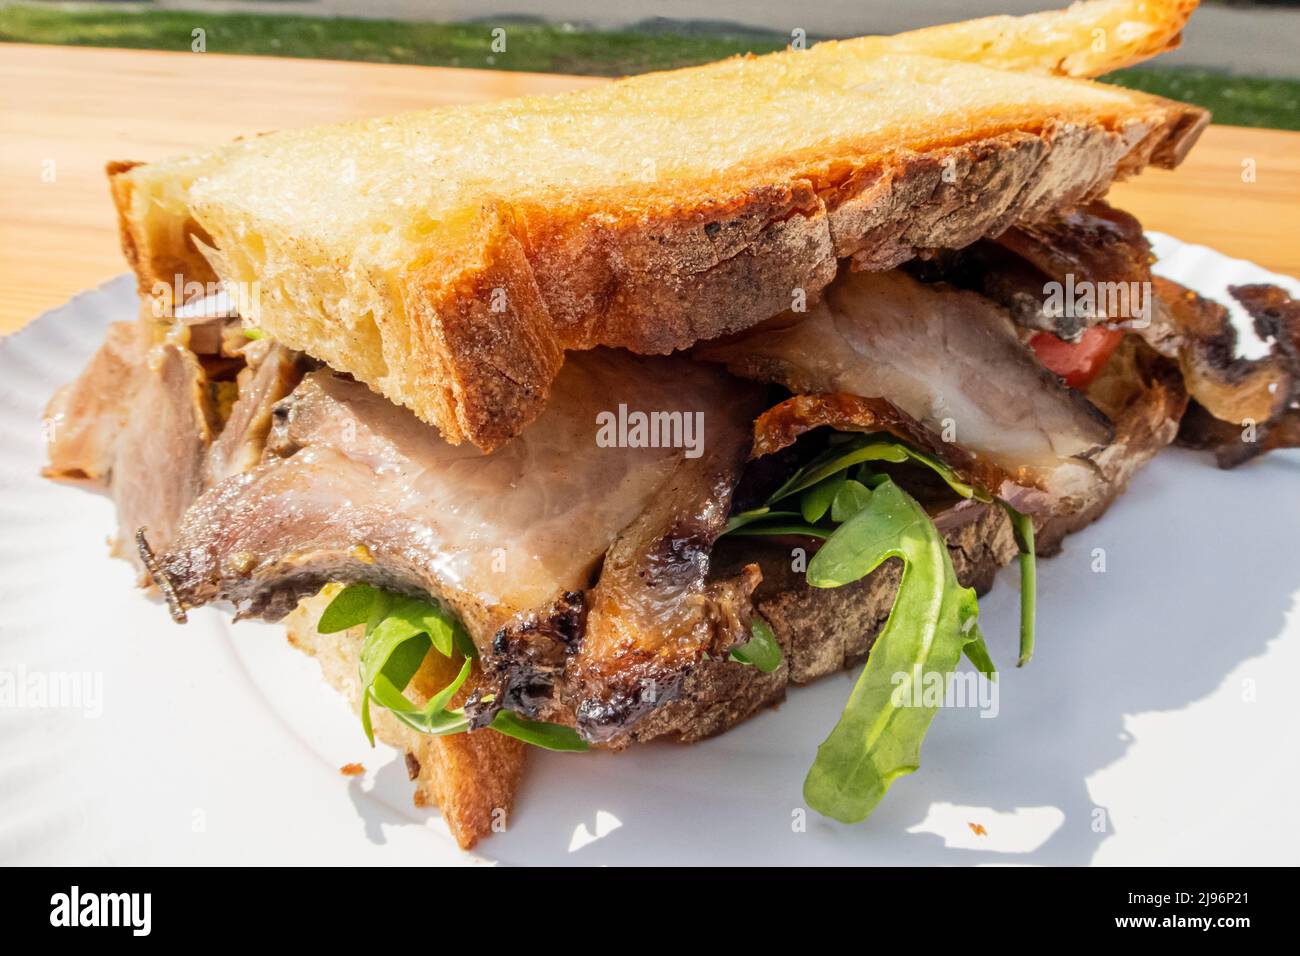 Farmer's bread sandwiched with suckling pig and rucula, close-up Stock Photo